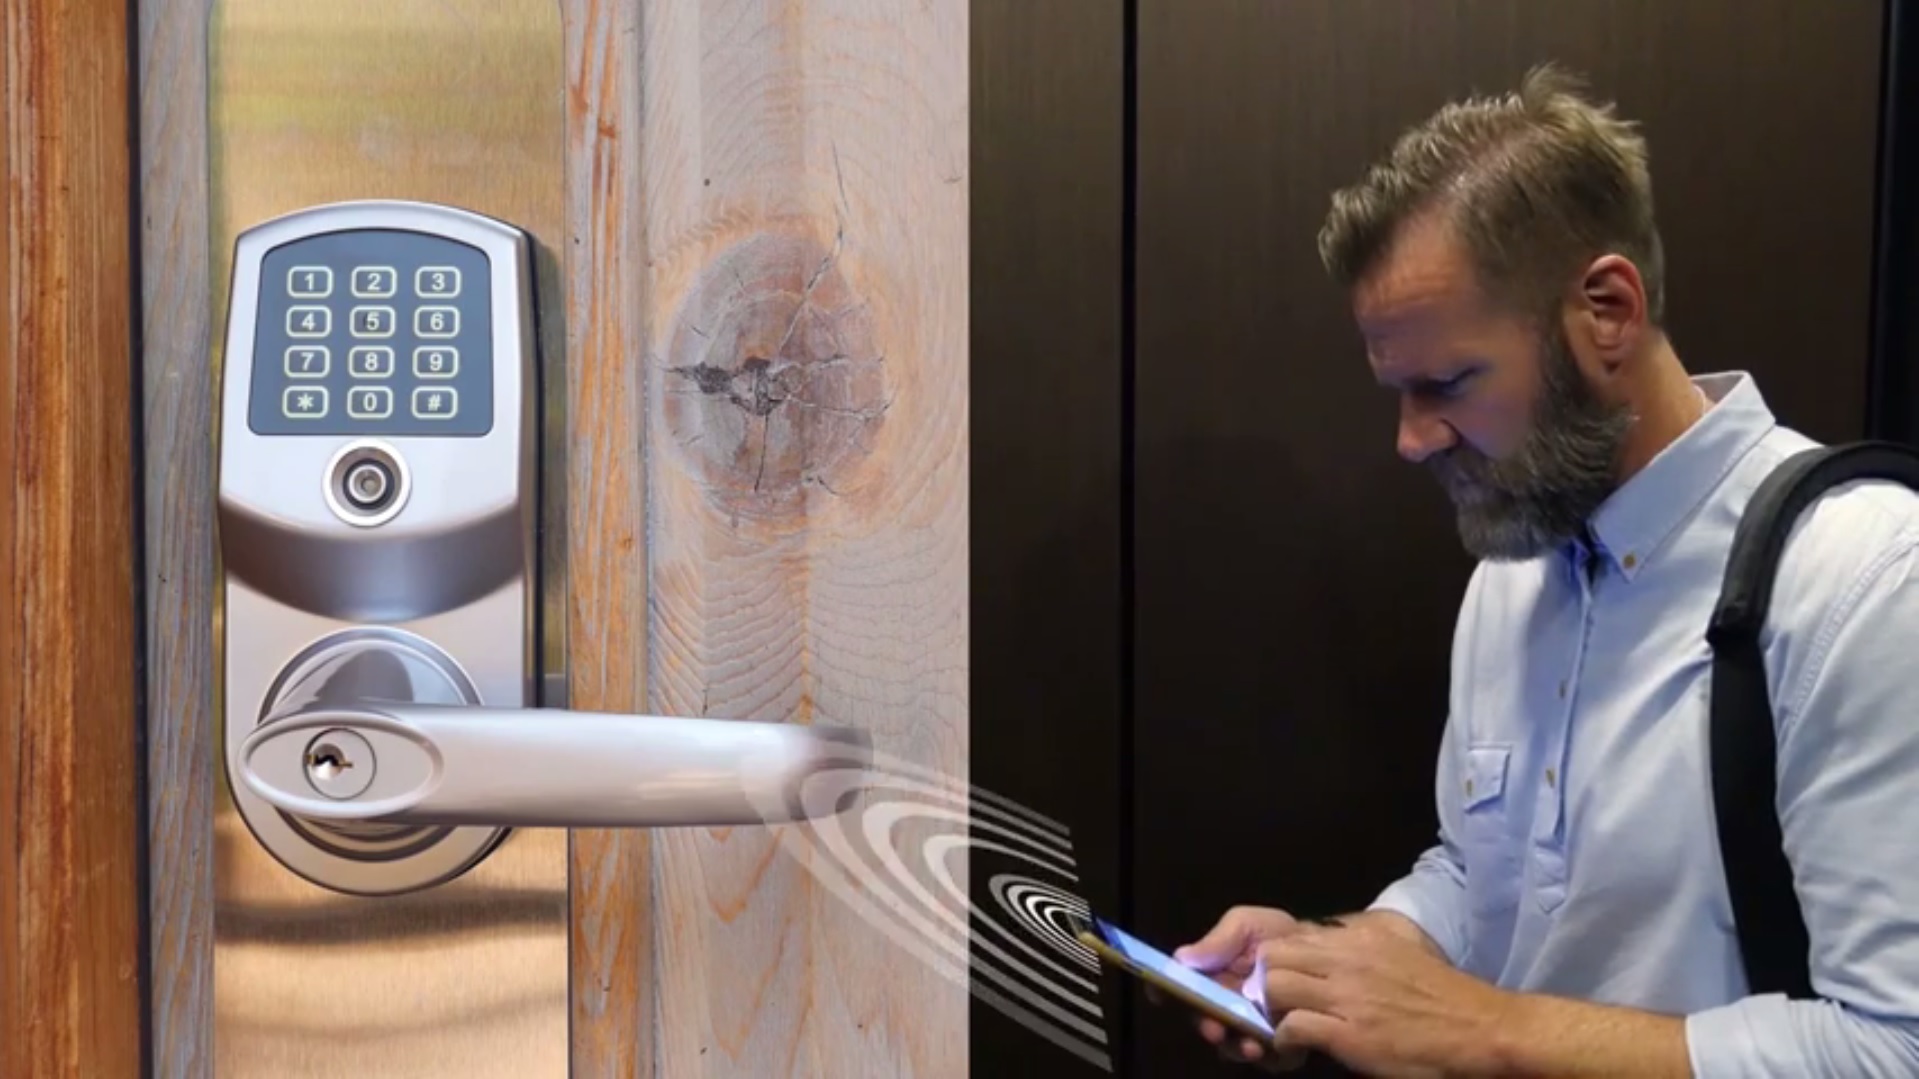 LockState’s IoT platform of connected devices includes smart locks, motions sensors, power plugs, window sensors, and more.